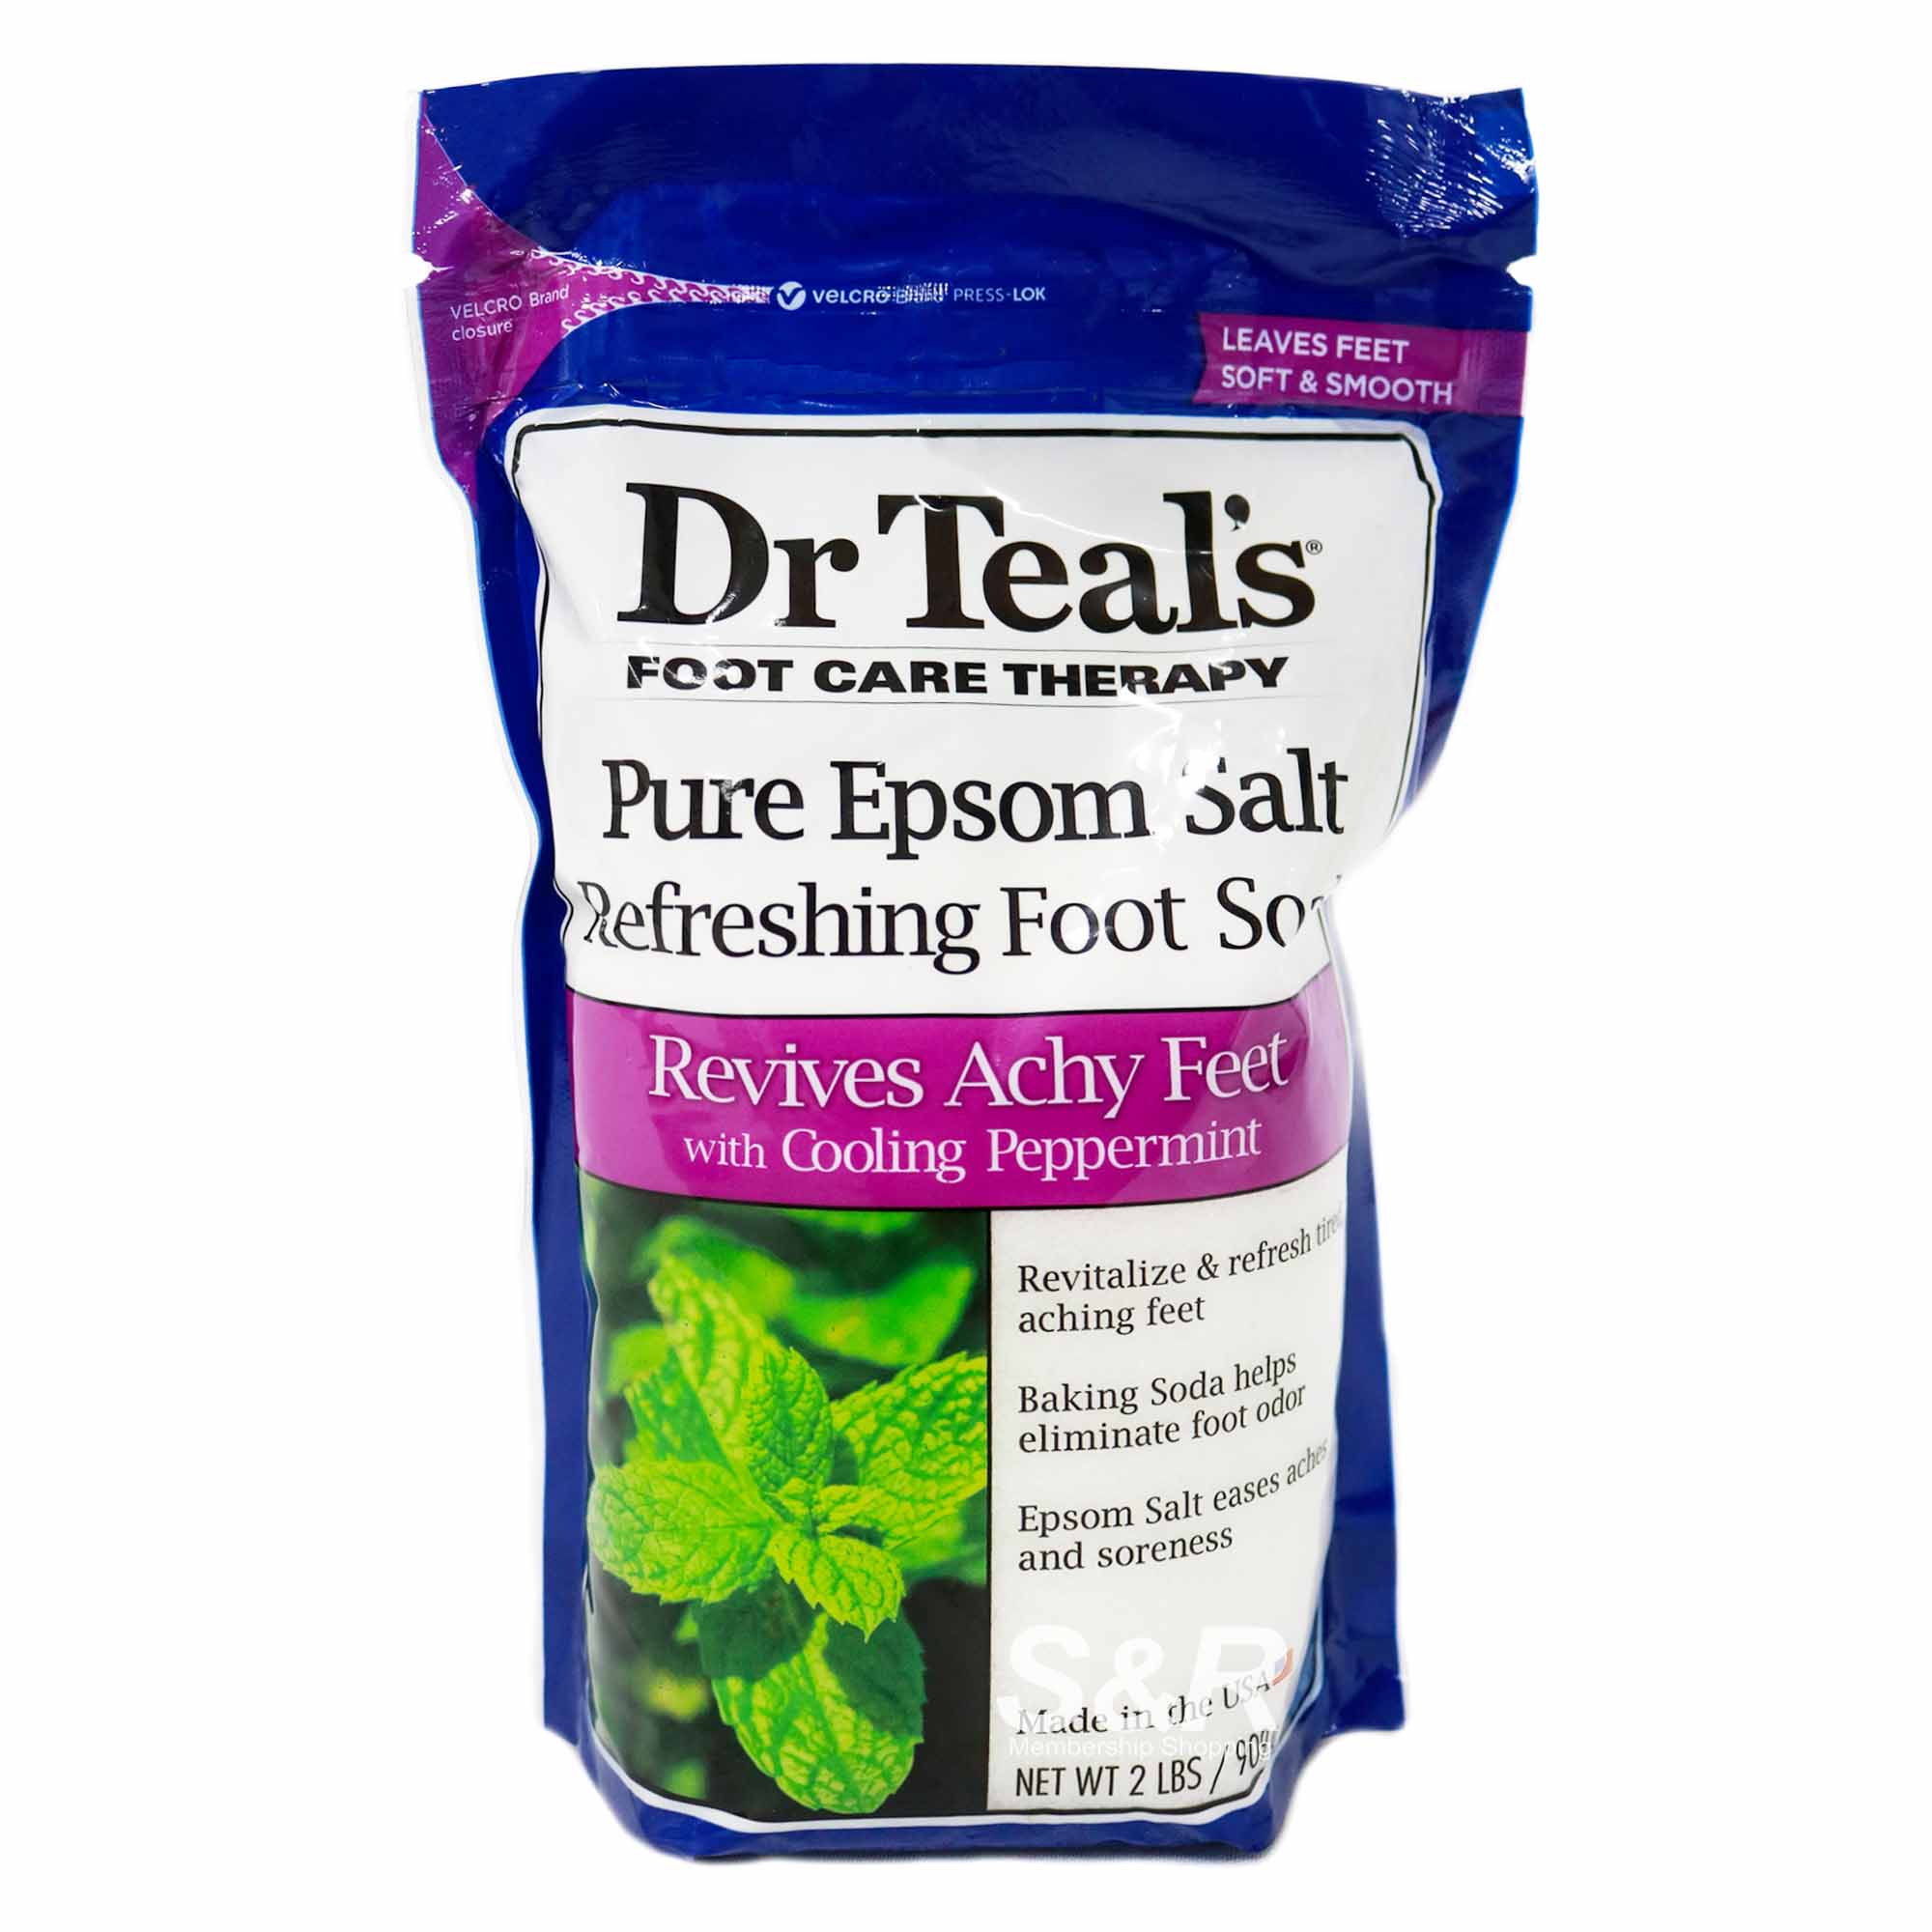 Dr. Teal’s Foot Care Therapy Pure Epsom Salt with Cooling Peppermint 909g